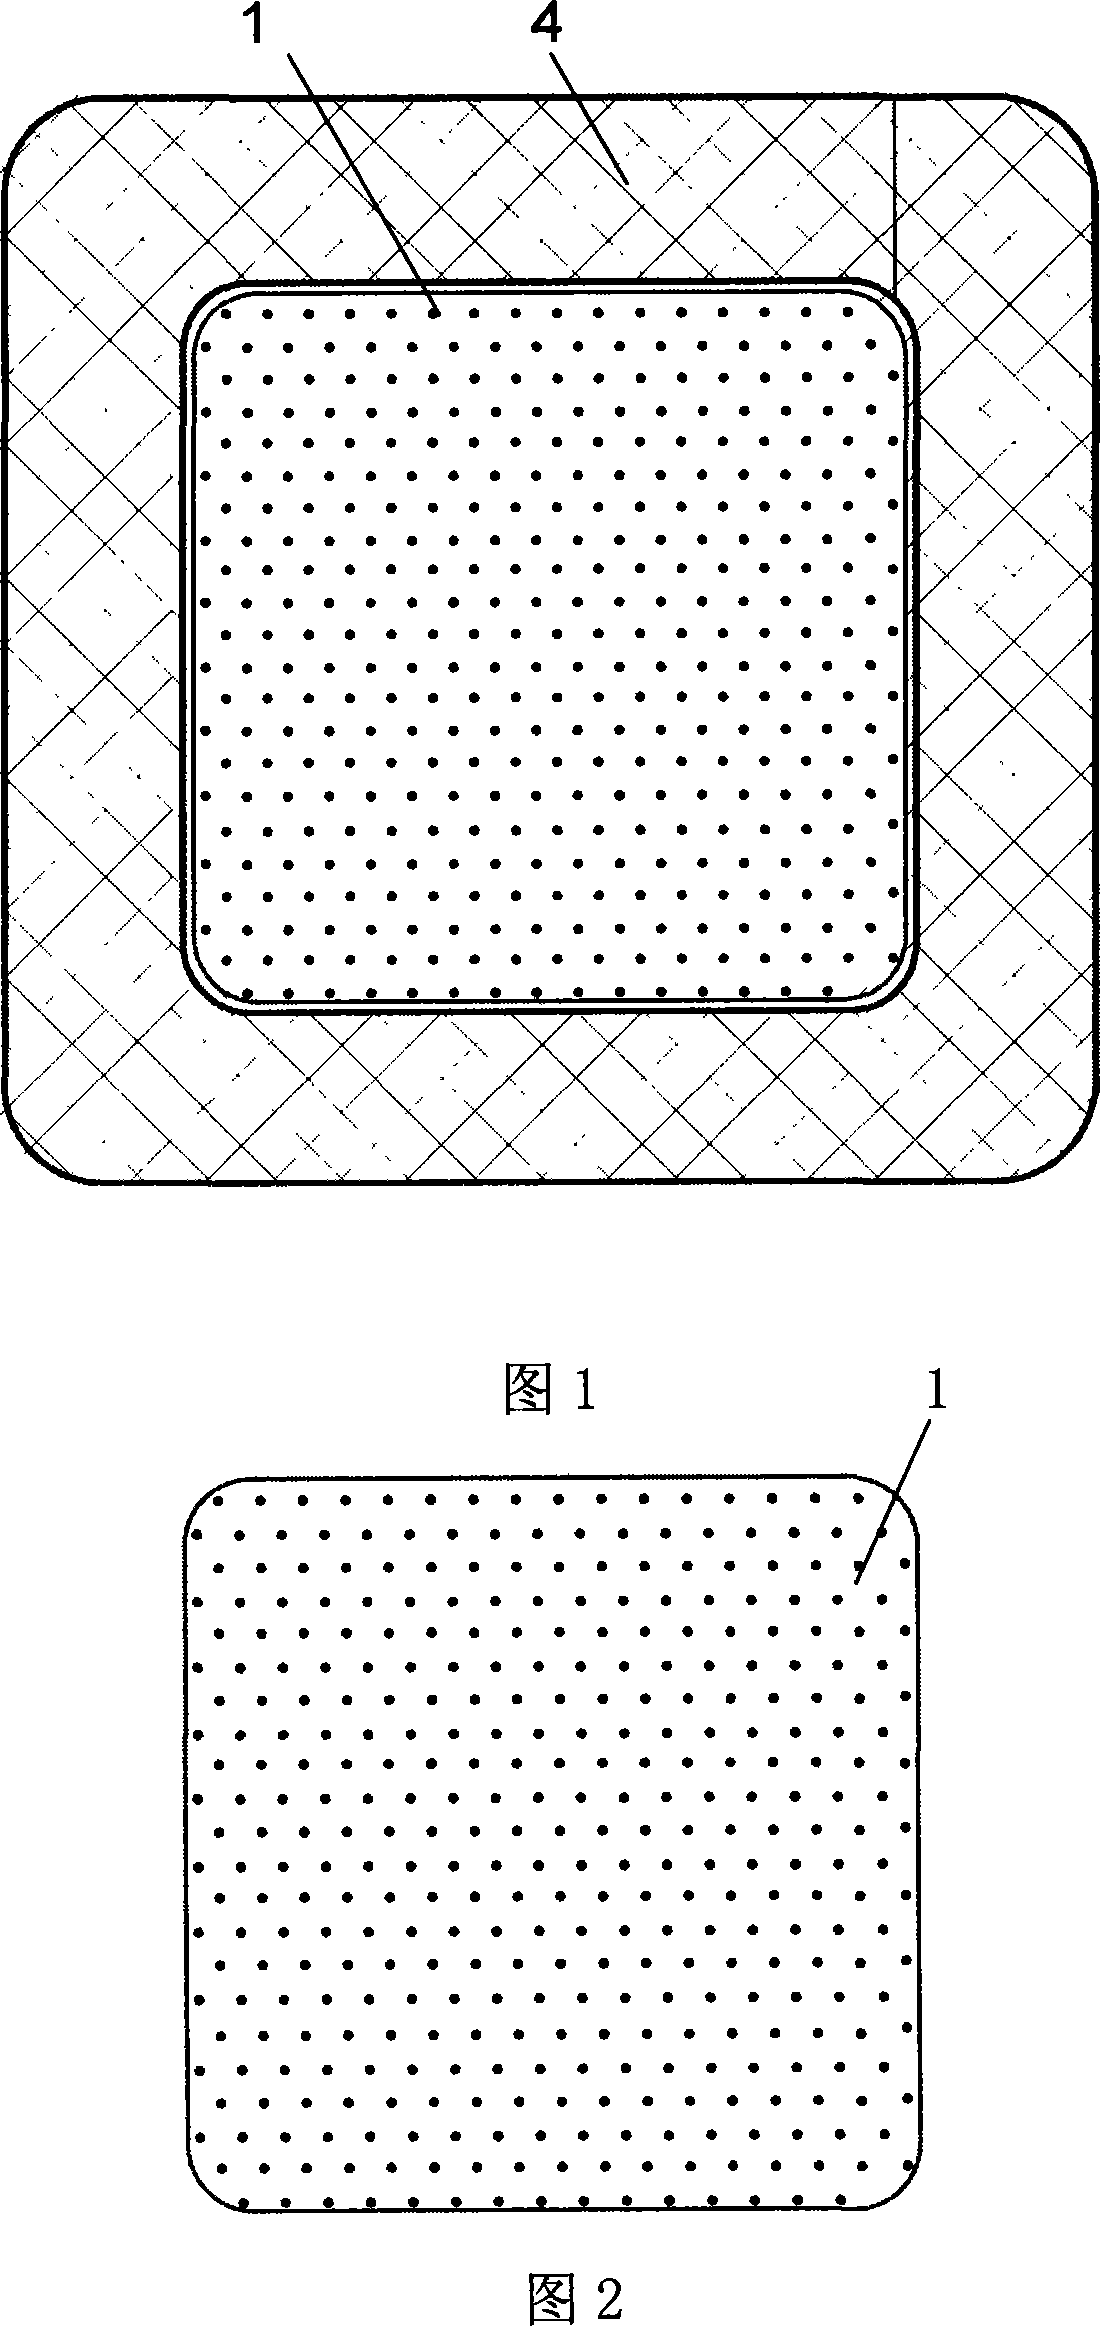 External fixed medical use paster for material with memory and bonding dressing, and method of application